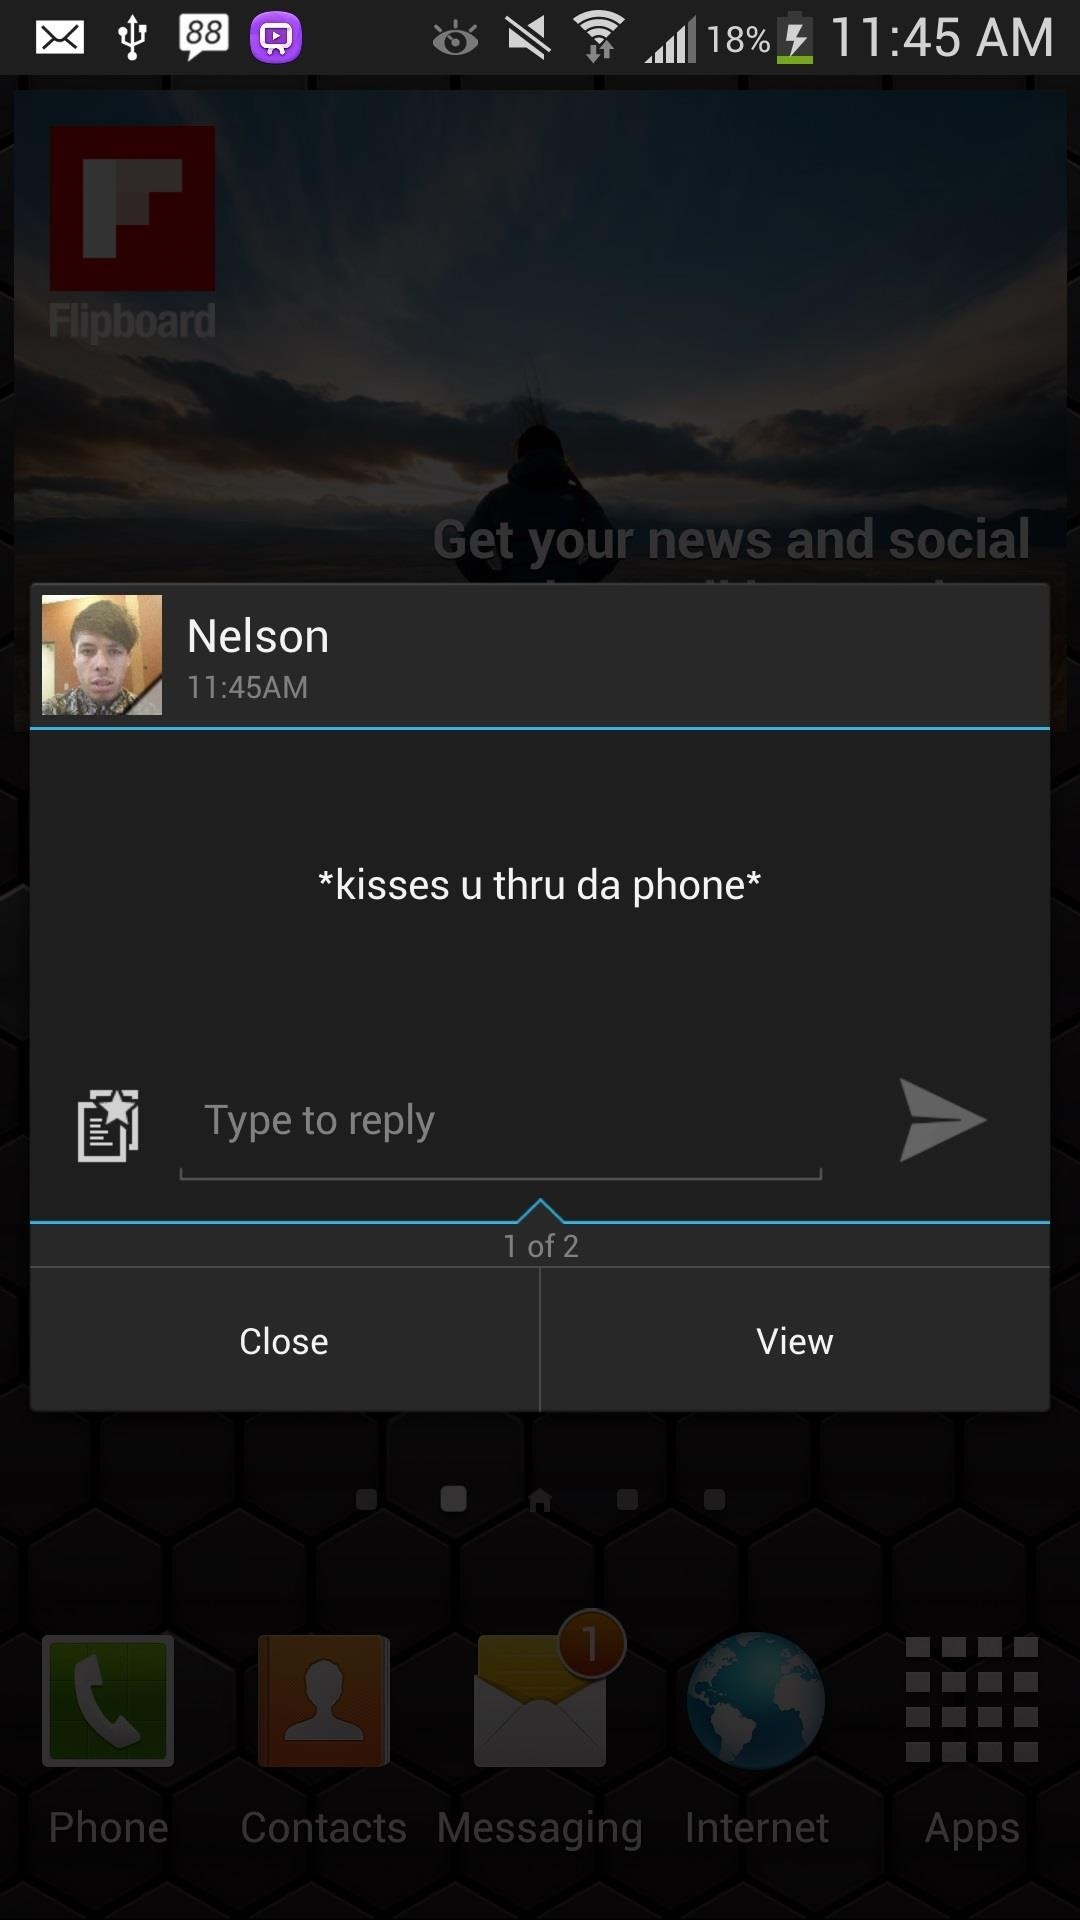 Text Better on Your Samsung Galaxy S4 with This Hybrid Messaging App Based on Android 4.3 & CyanogenMod 10.2